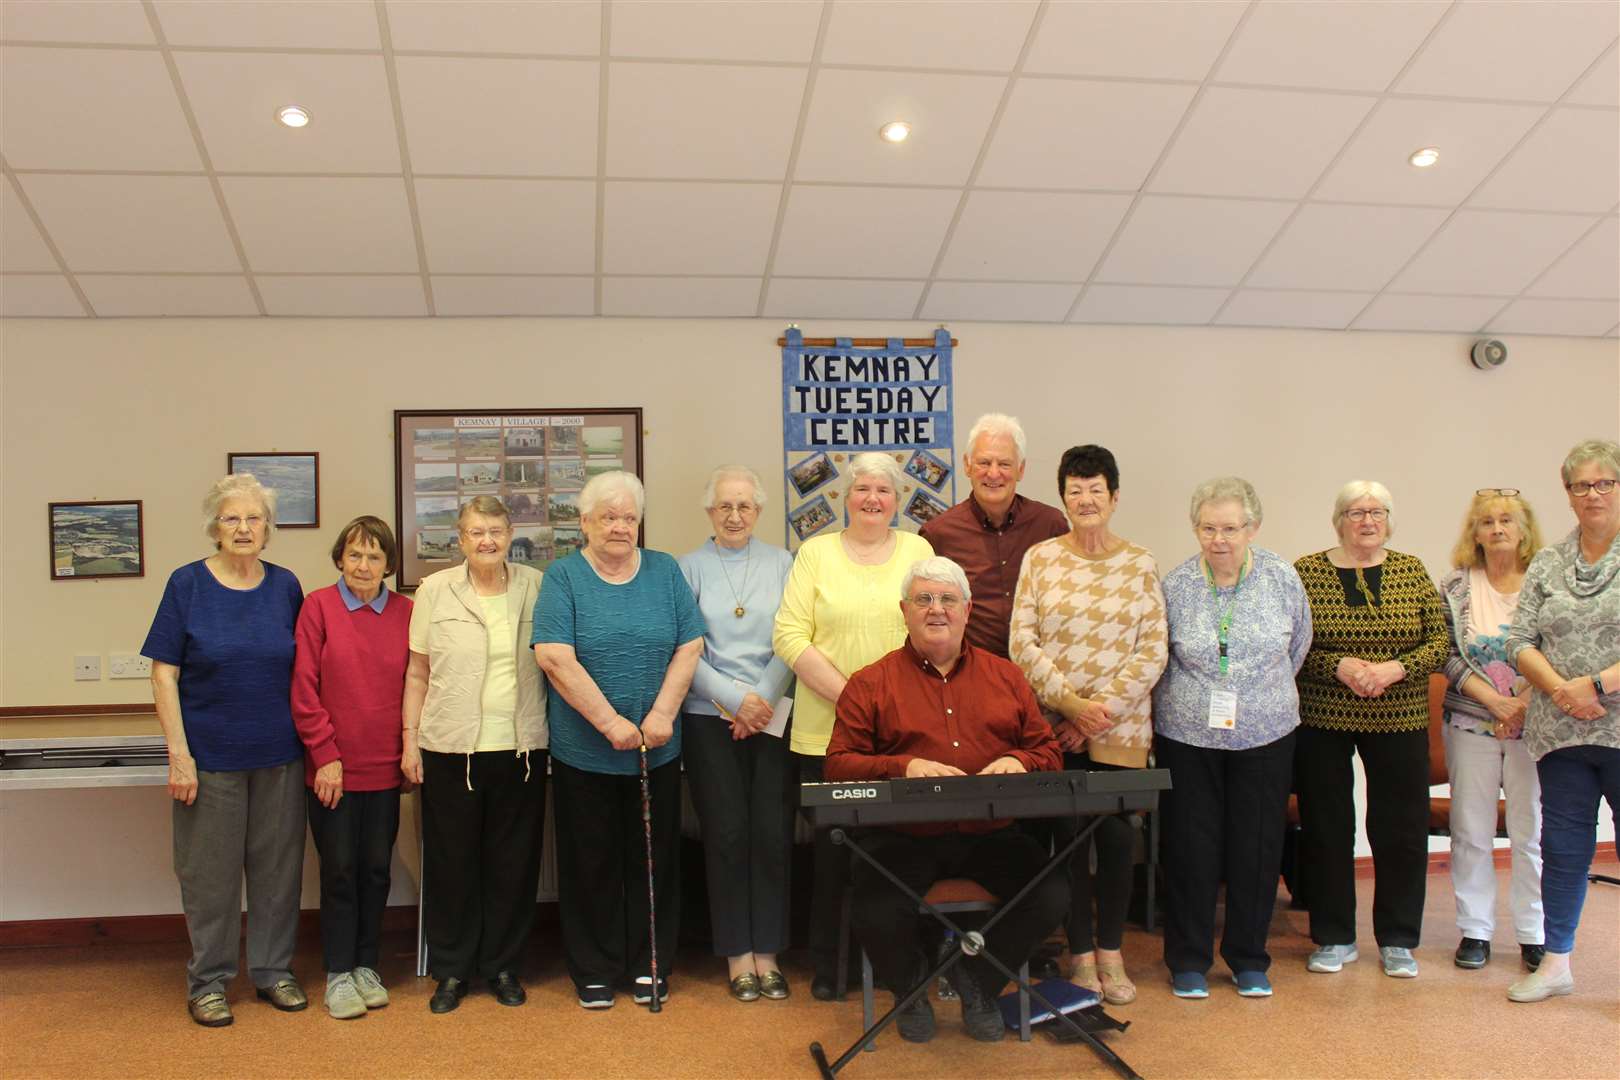 Friends in Harmony entertainers Ian Dow (keyboard), Eva Will and Ian Booth with members of the Tuesday centre in the Frienship room, Kemnay village hall earlier this week. Picture: Griselda McGregor